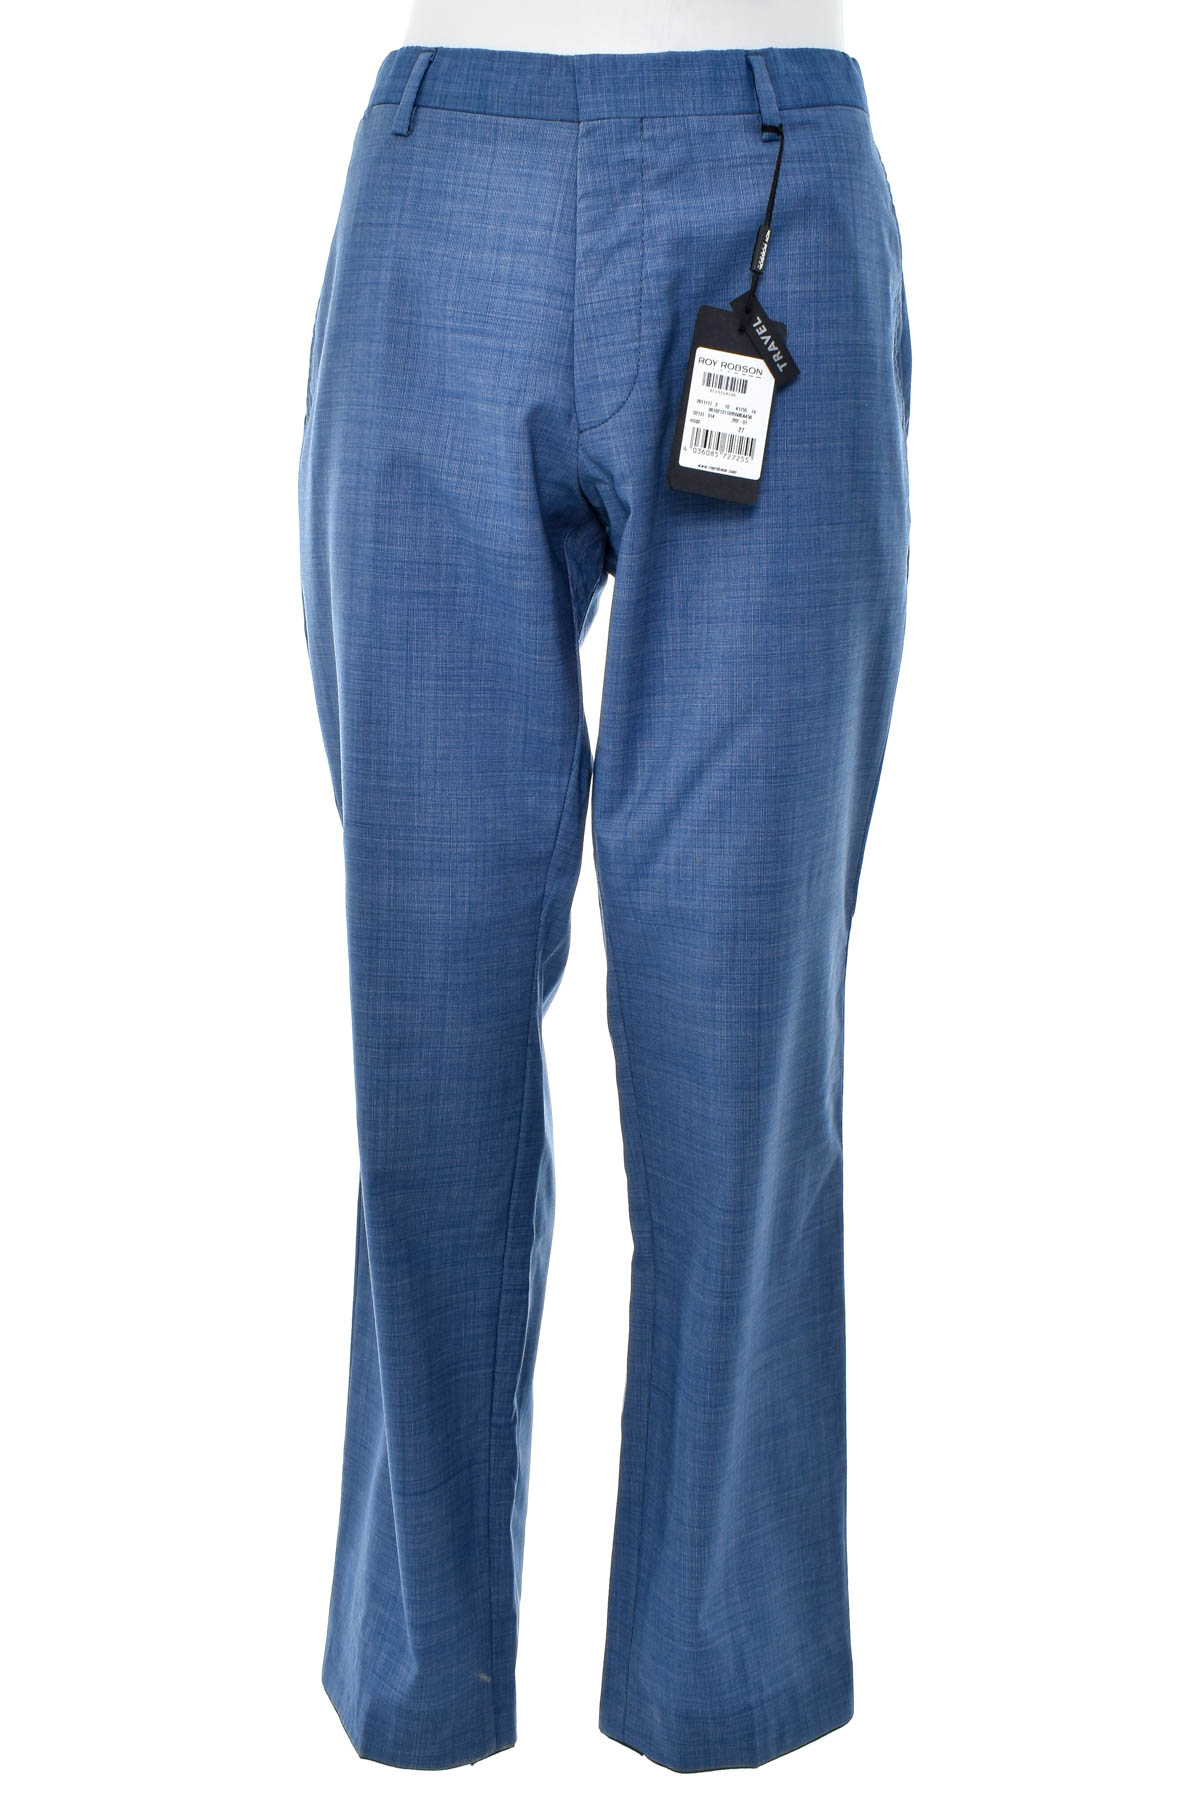 Men's trousers - Roy Robson - 0